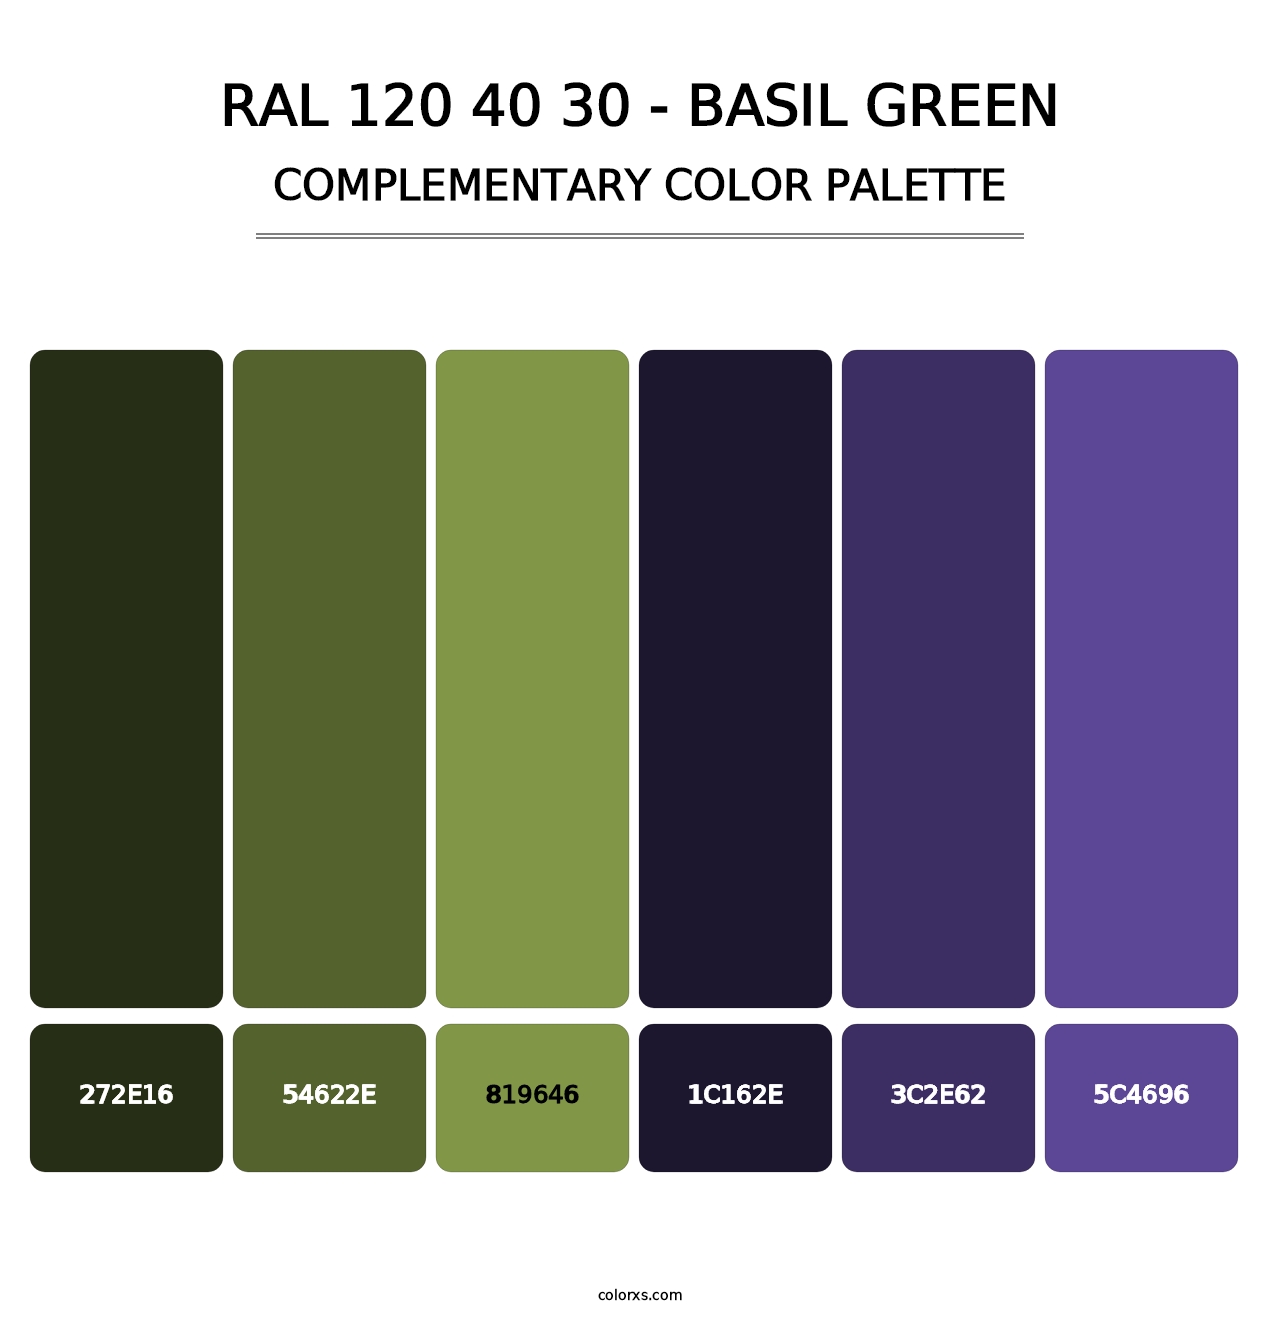 RAL 120 40 30 - Basil Green - Complementary Color Palette